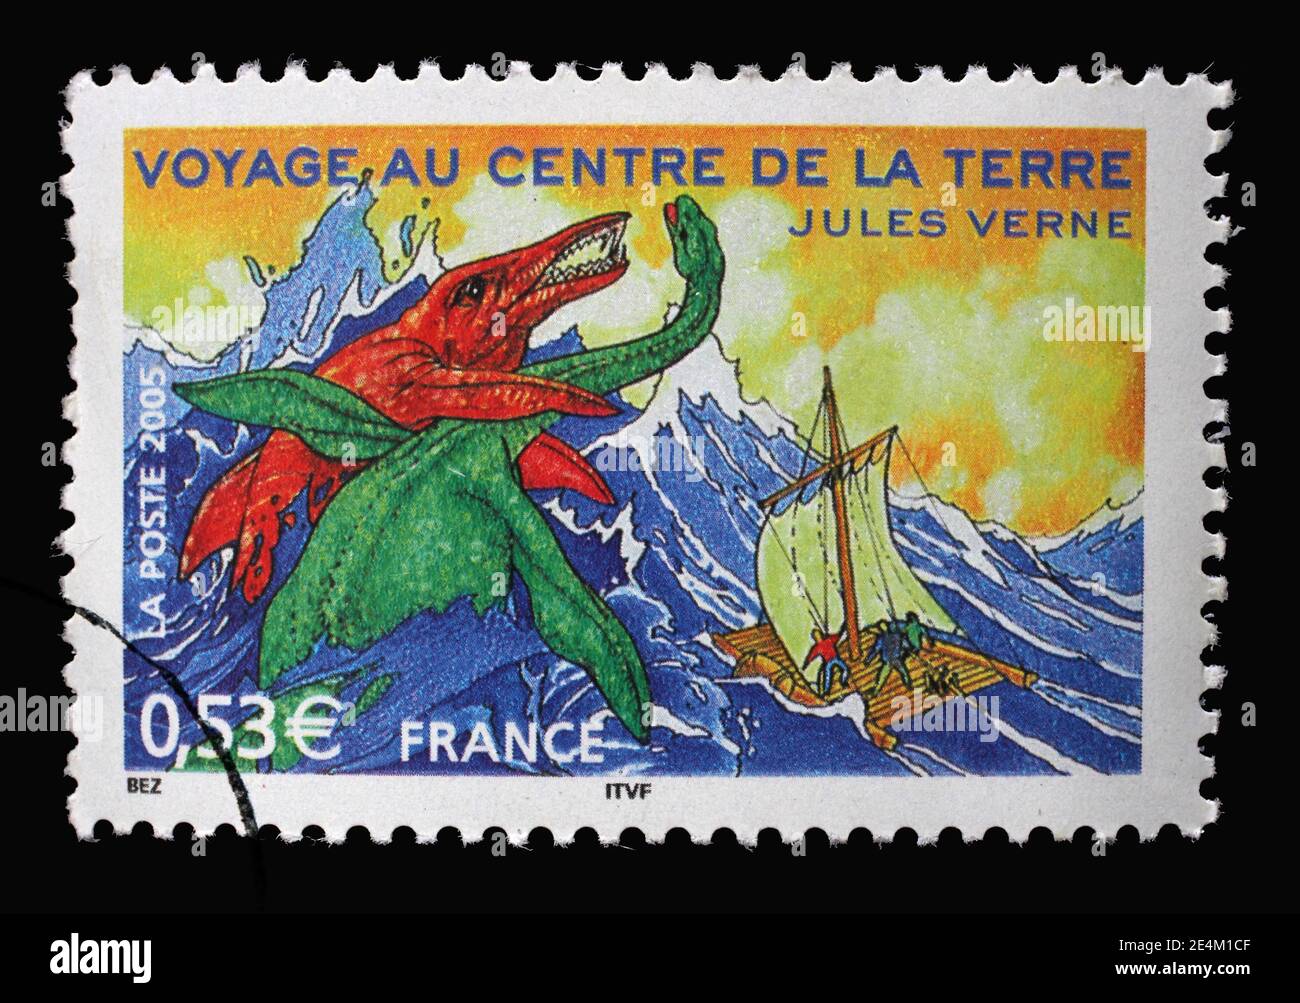 Stamp printed in the France shows an image of Journey to the Center of the Earth, a novel by Jules Verne, Jules Verne stories series, circa 2005 Stock Photo